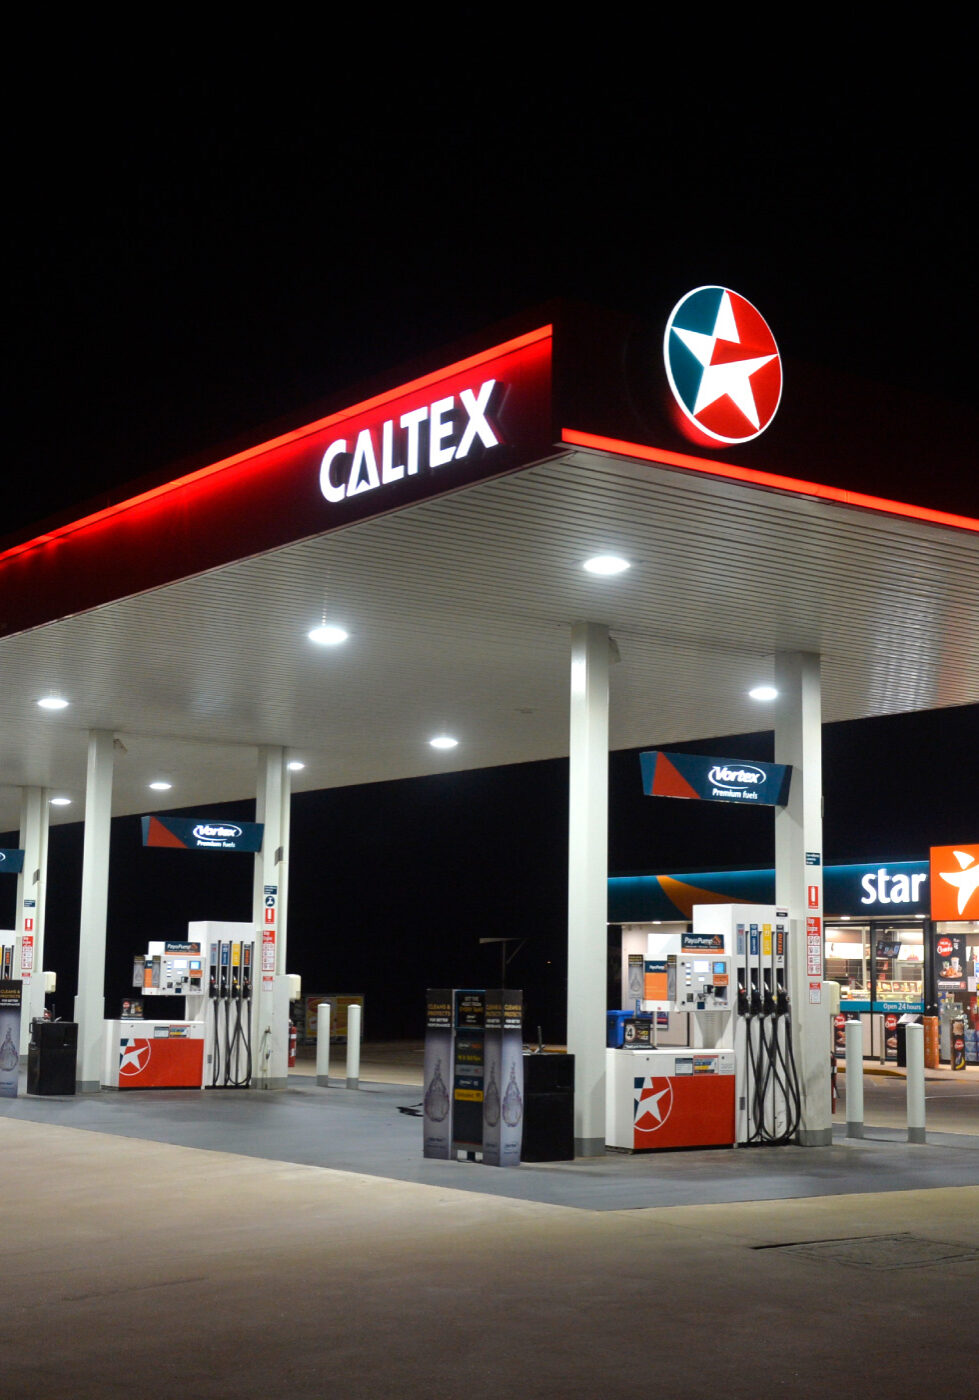 Northern-Territory-Electrical-Group-Project-Caltex-Service-Station